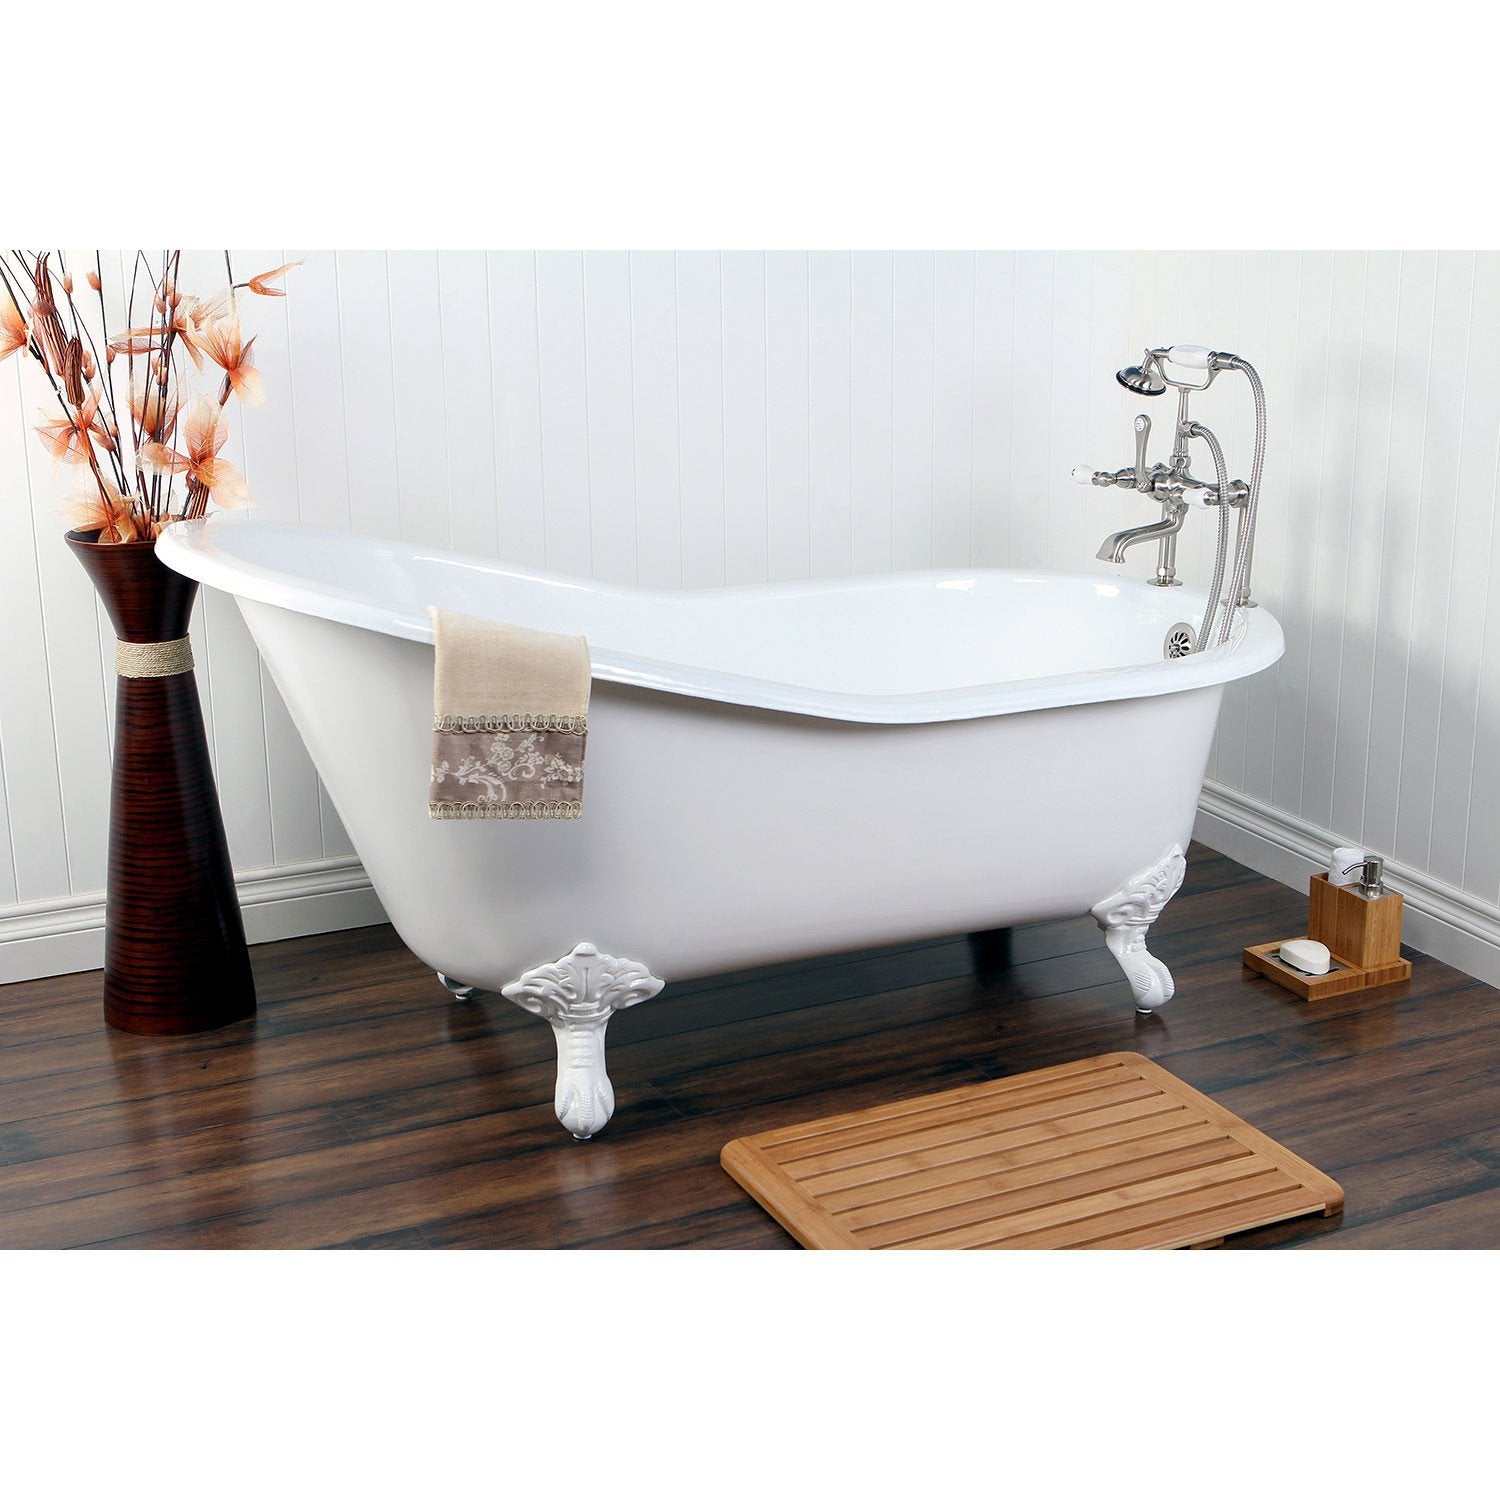 61" Cast Iron Clawfoot Tub with Satin Nickel Tub Filler & Hardware Package CTP13